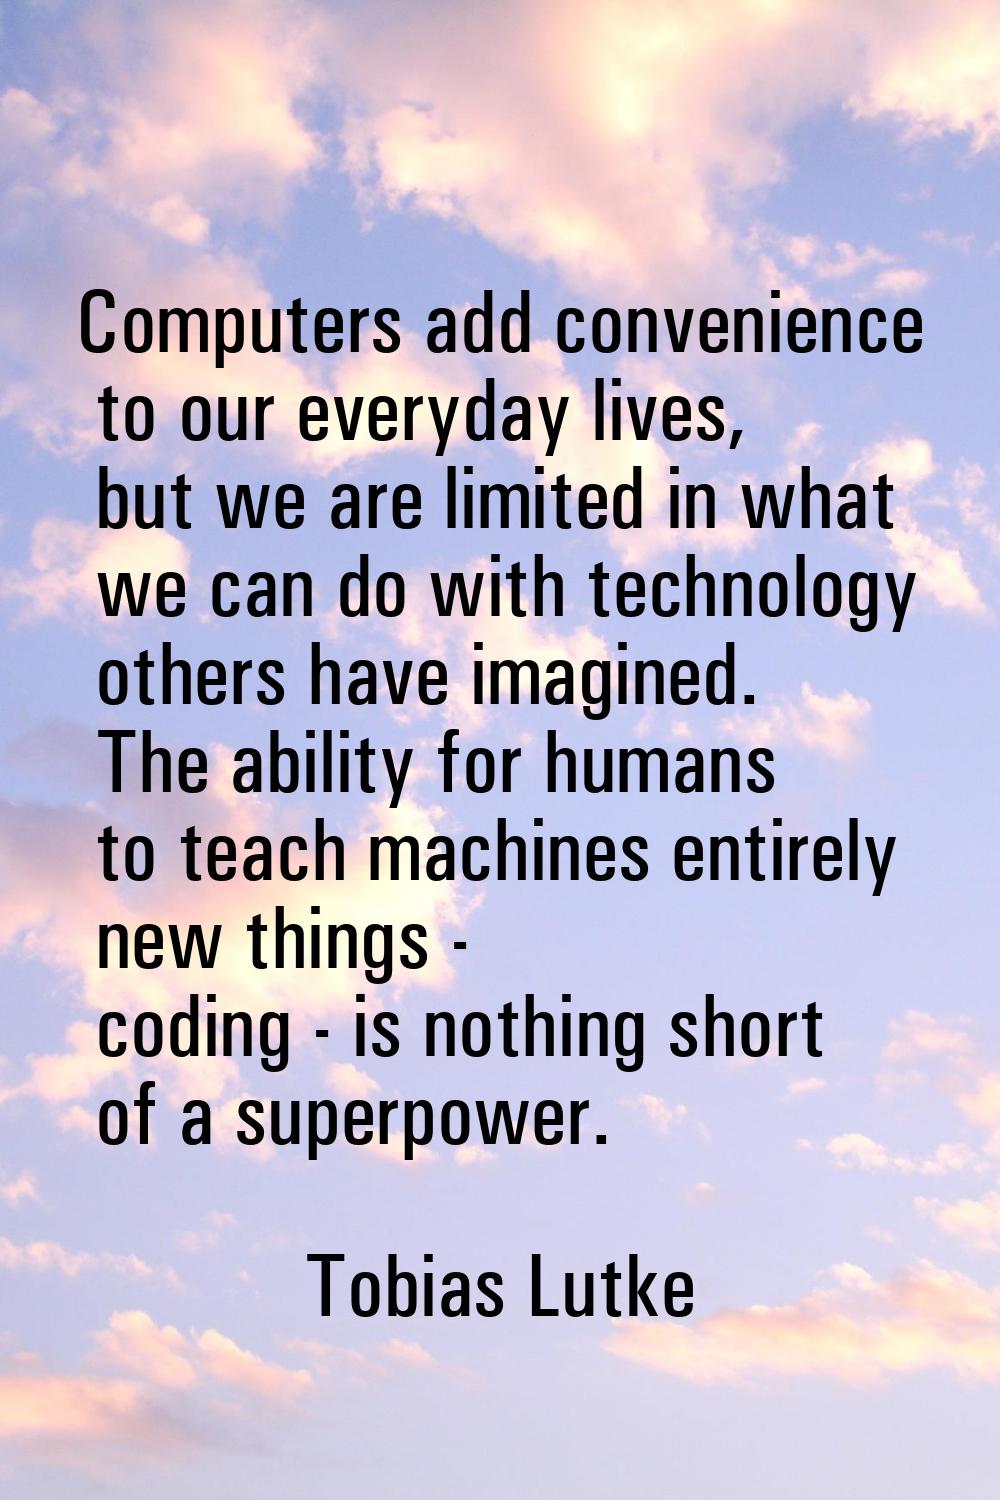 Computers add convenience to our everyday lives, but we are limited in what we can do with technolo